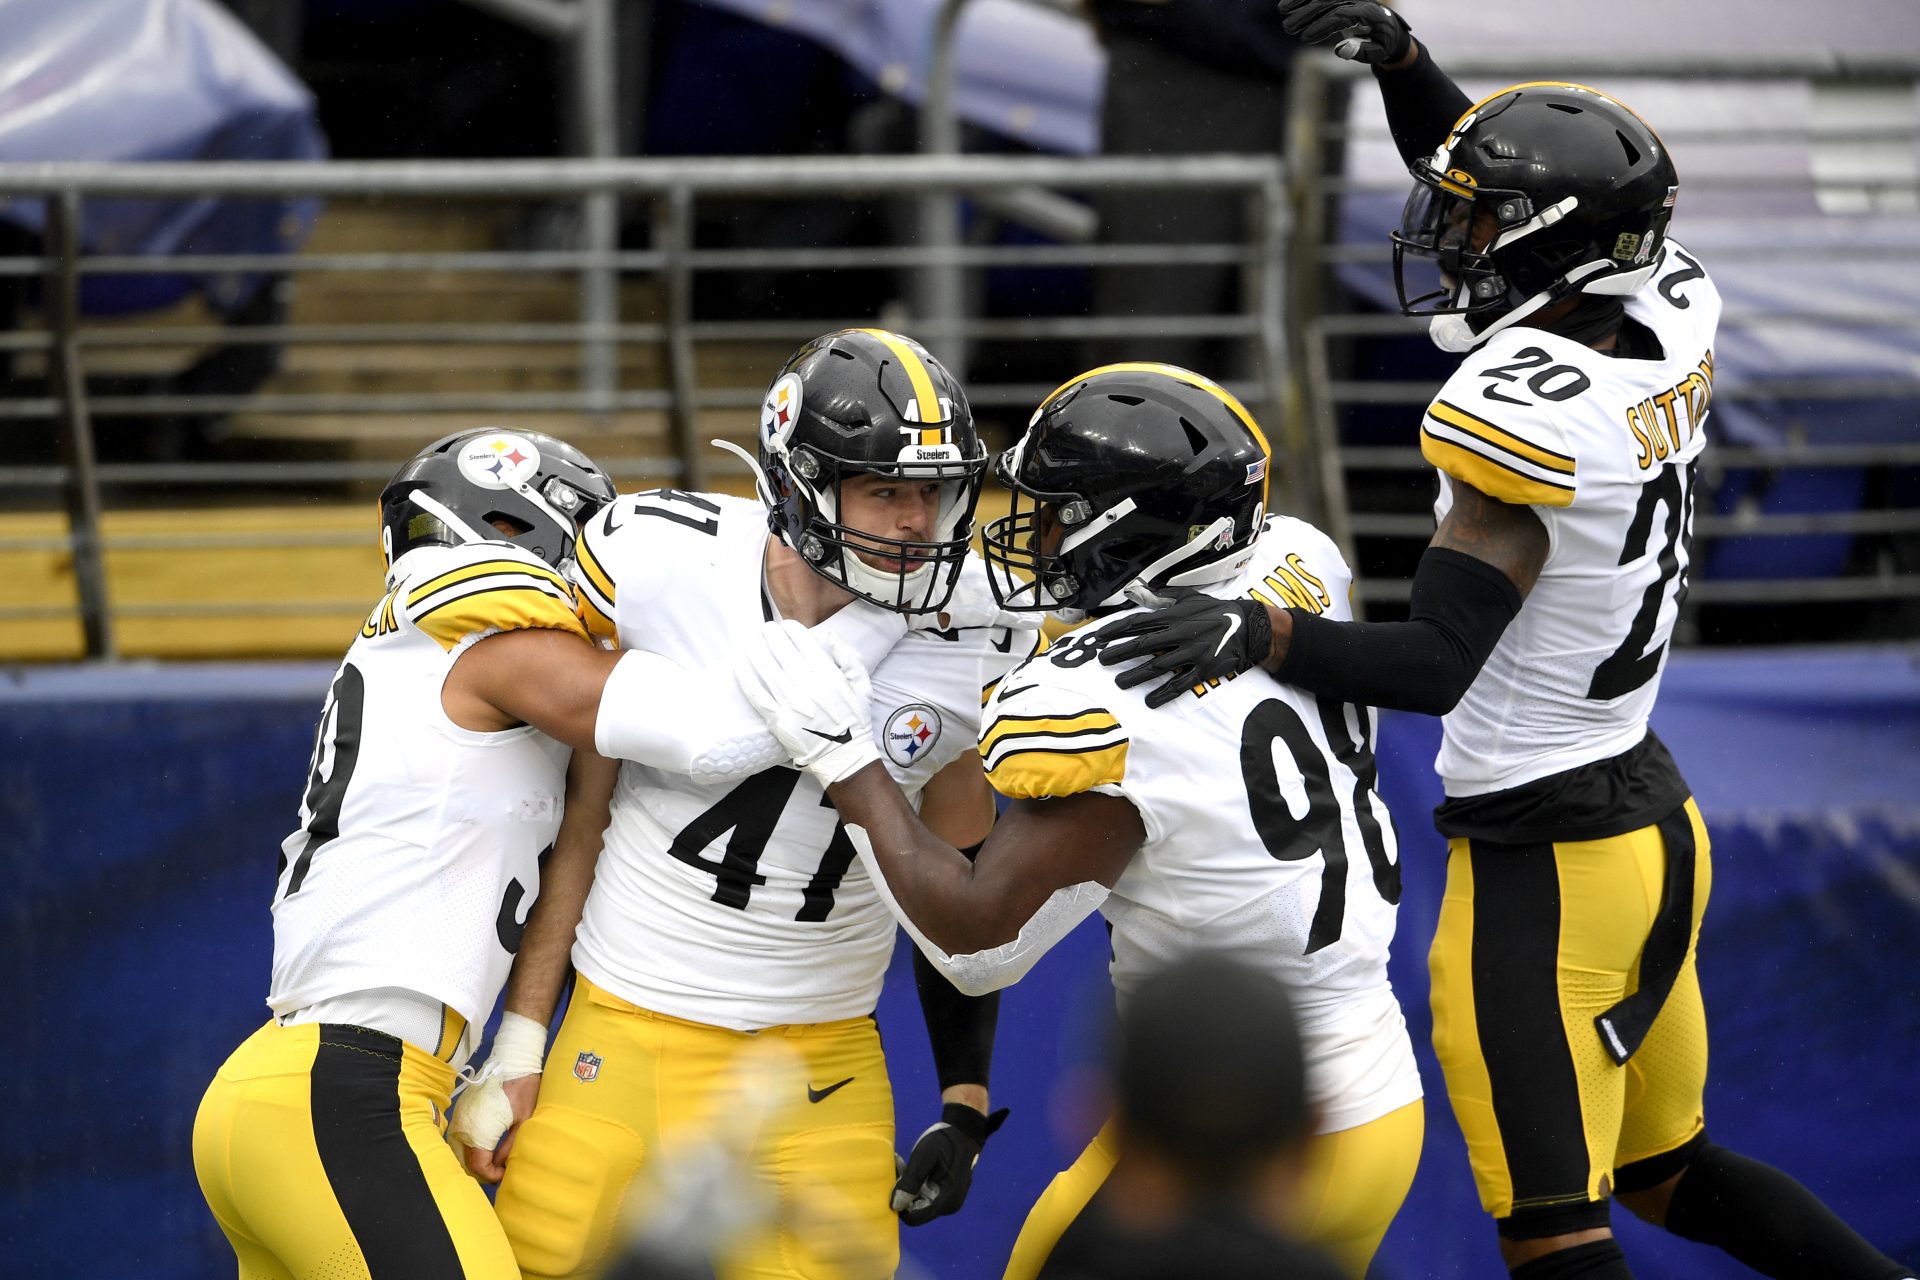 Pittsburgh Steelers linebacker Robert Spillane, second from left, celebrates with teammates after after scoring on an interception of a pass from Baltimore Ravens quarterback Lamar Jackson, not visible, during the first half of an NFL football game, Sunday, Nov. 1, 2020, in Baltimore.